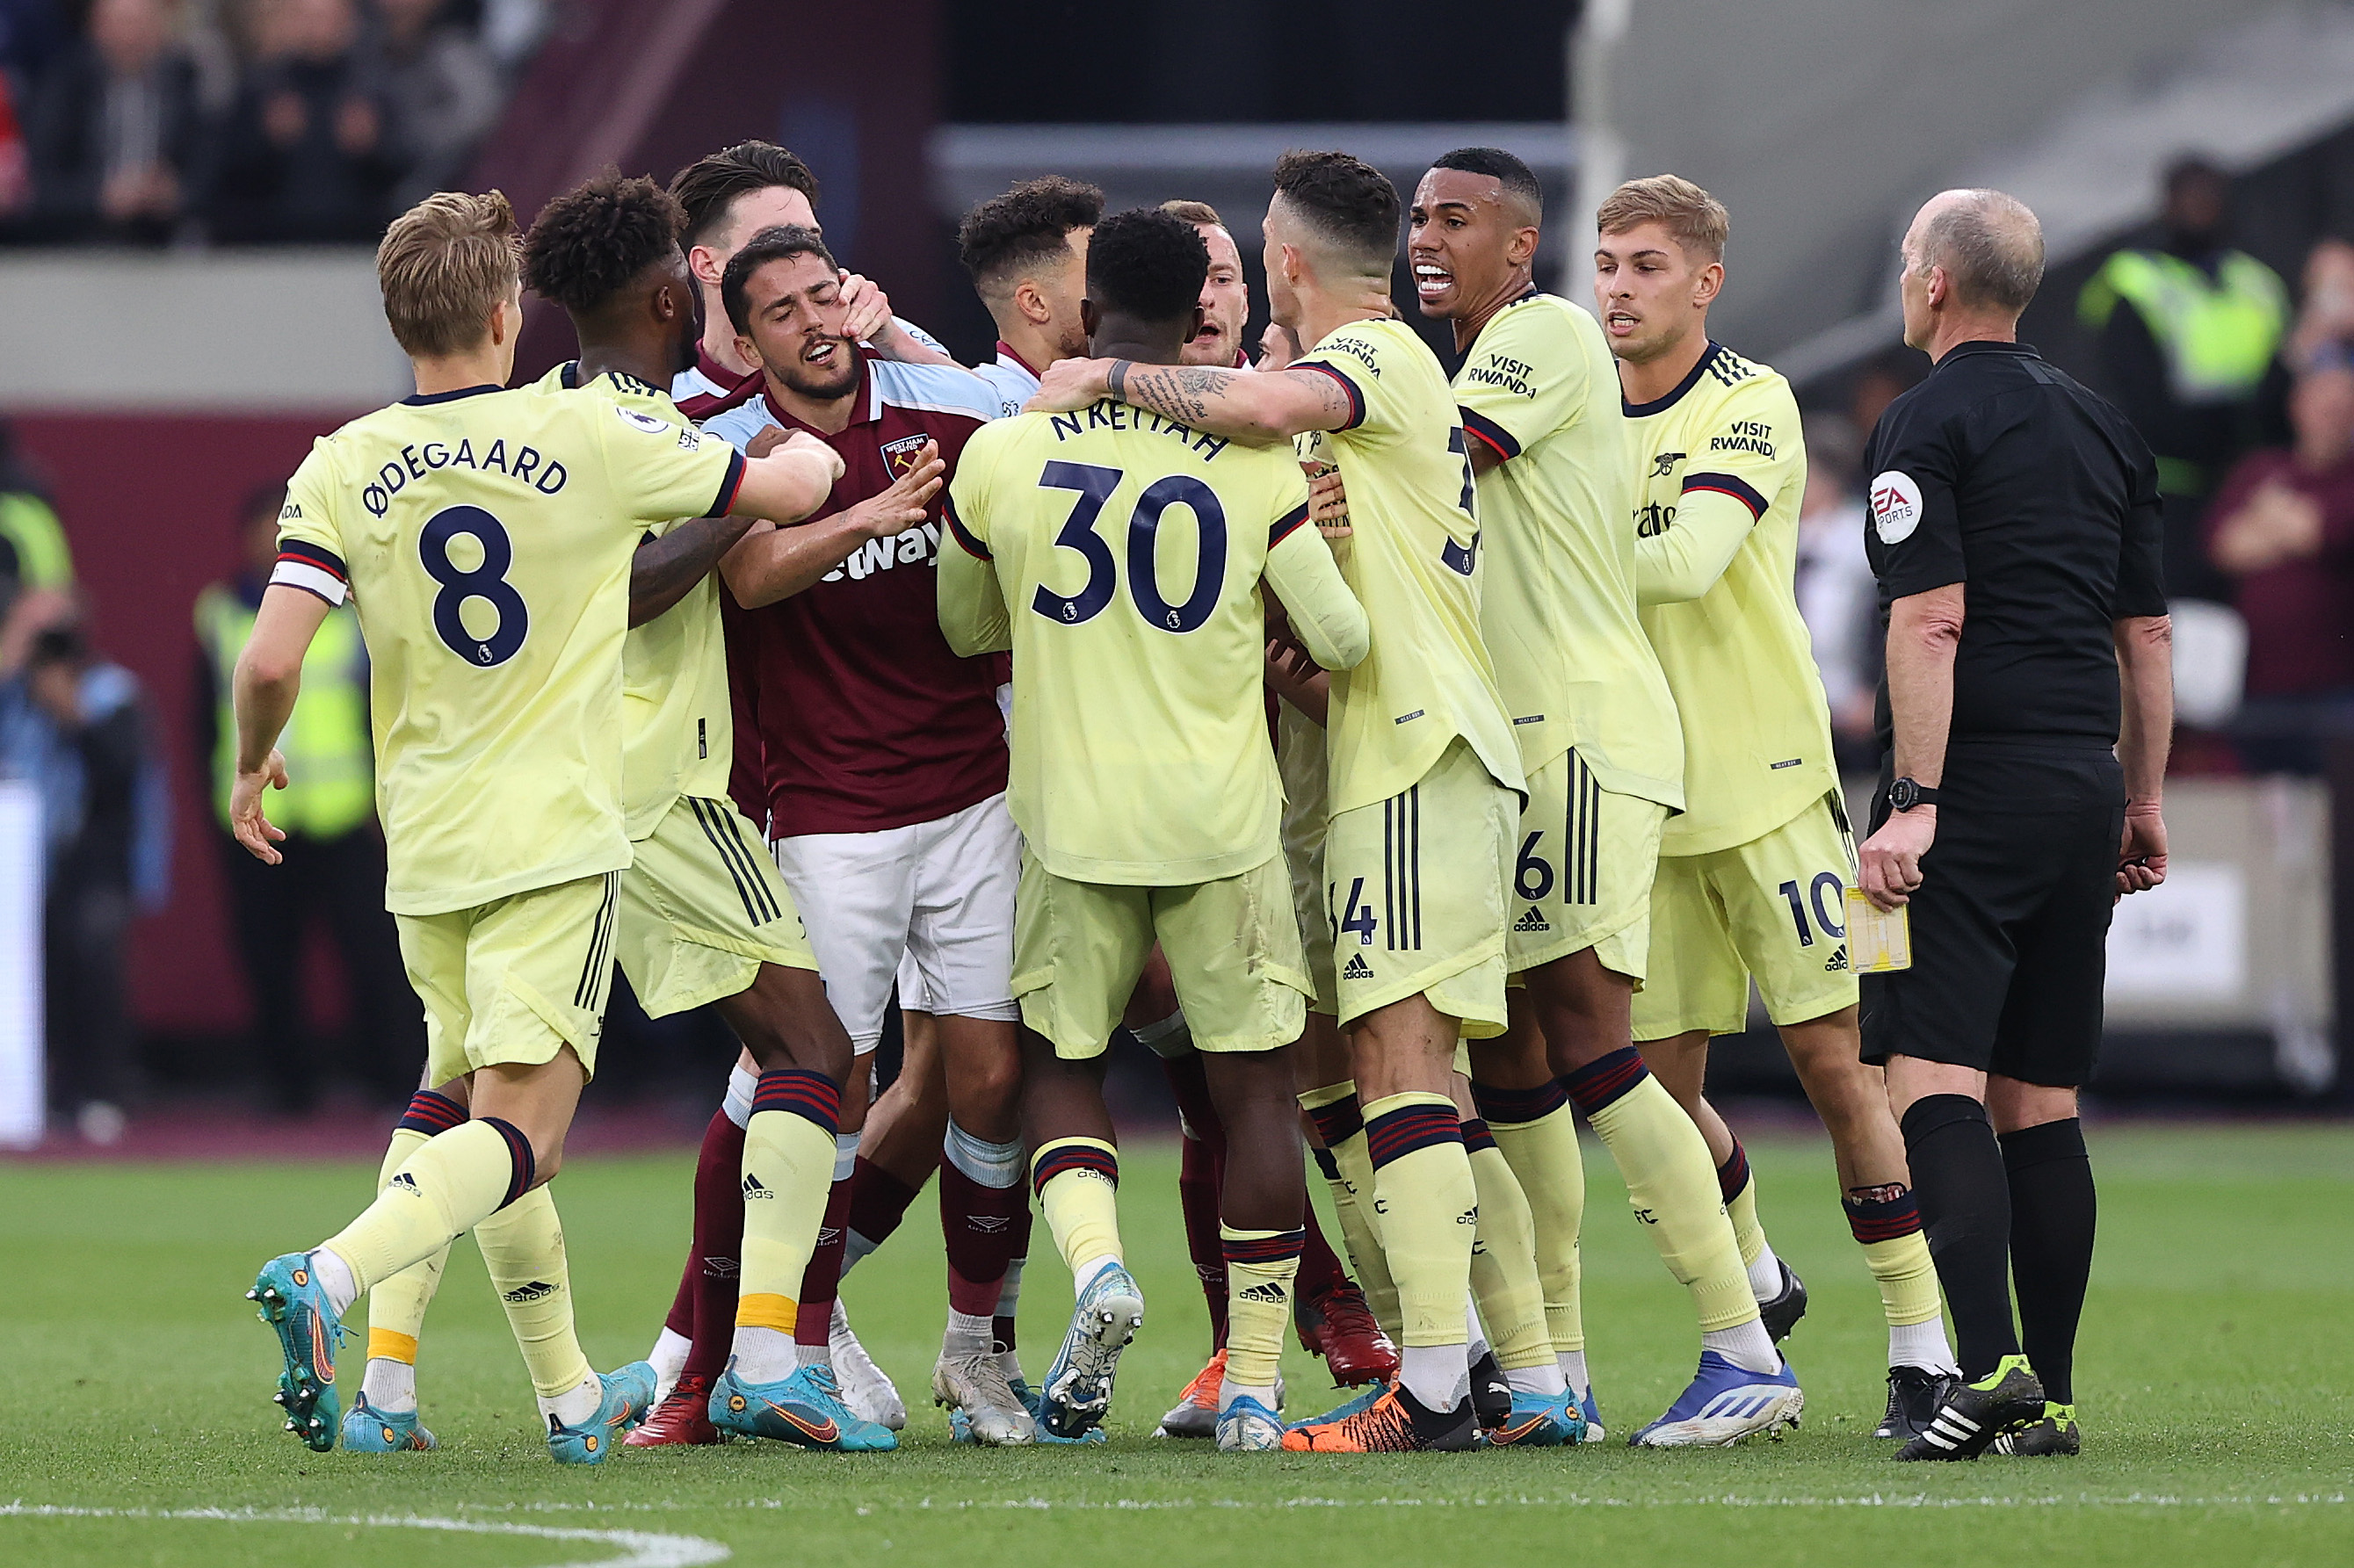 Lowell Hornby reflects on a huge three points at West Ham as fourth place Arsenal win at  London Stadium 